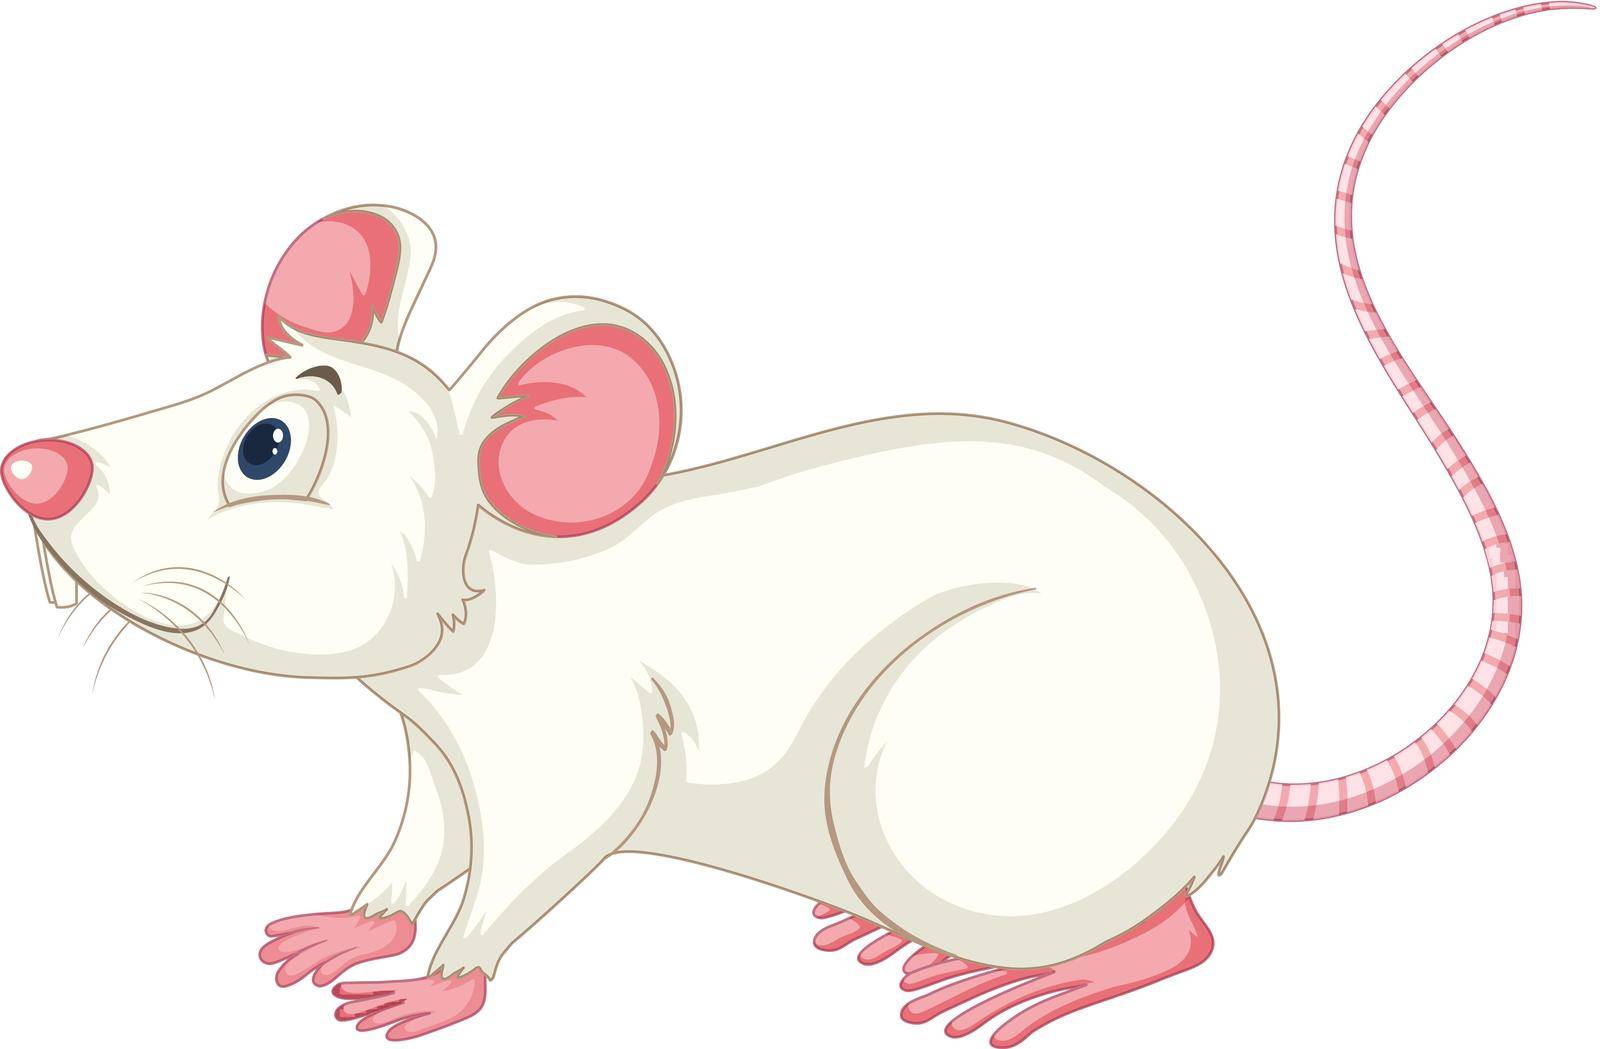 White rat on white background by iimages